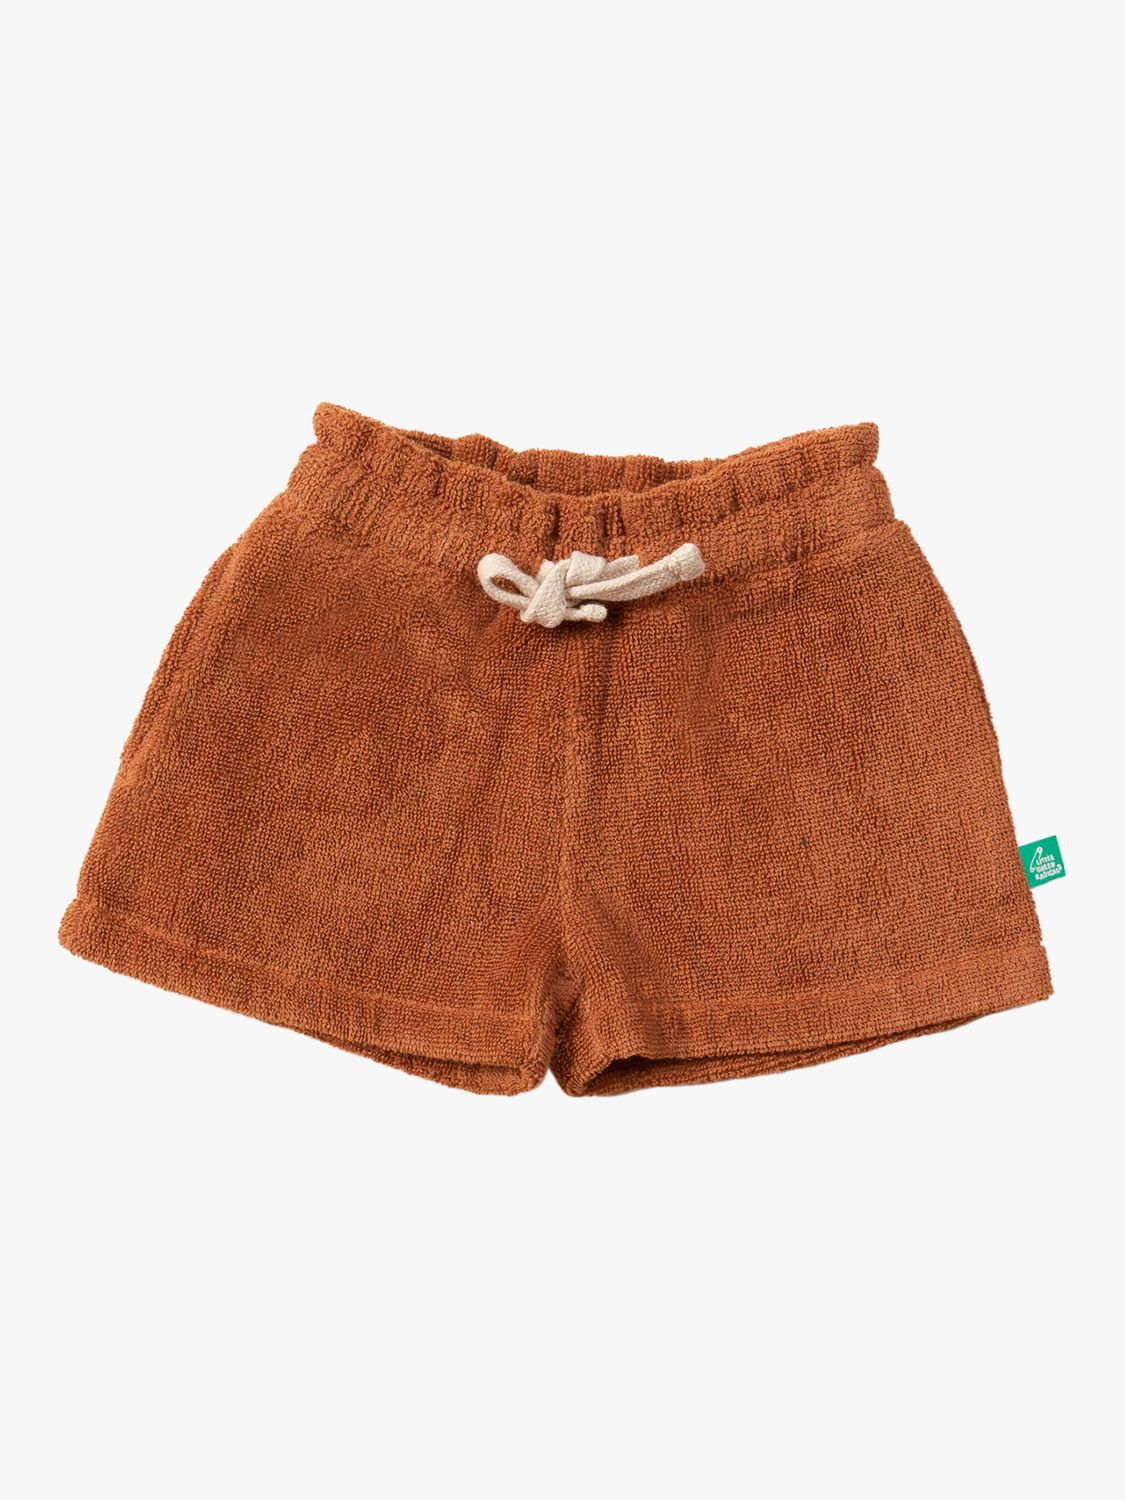 Little Green Radicals Baby Organic Cotton Towelling Shorts, Walnut Solid, 12-24 months